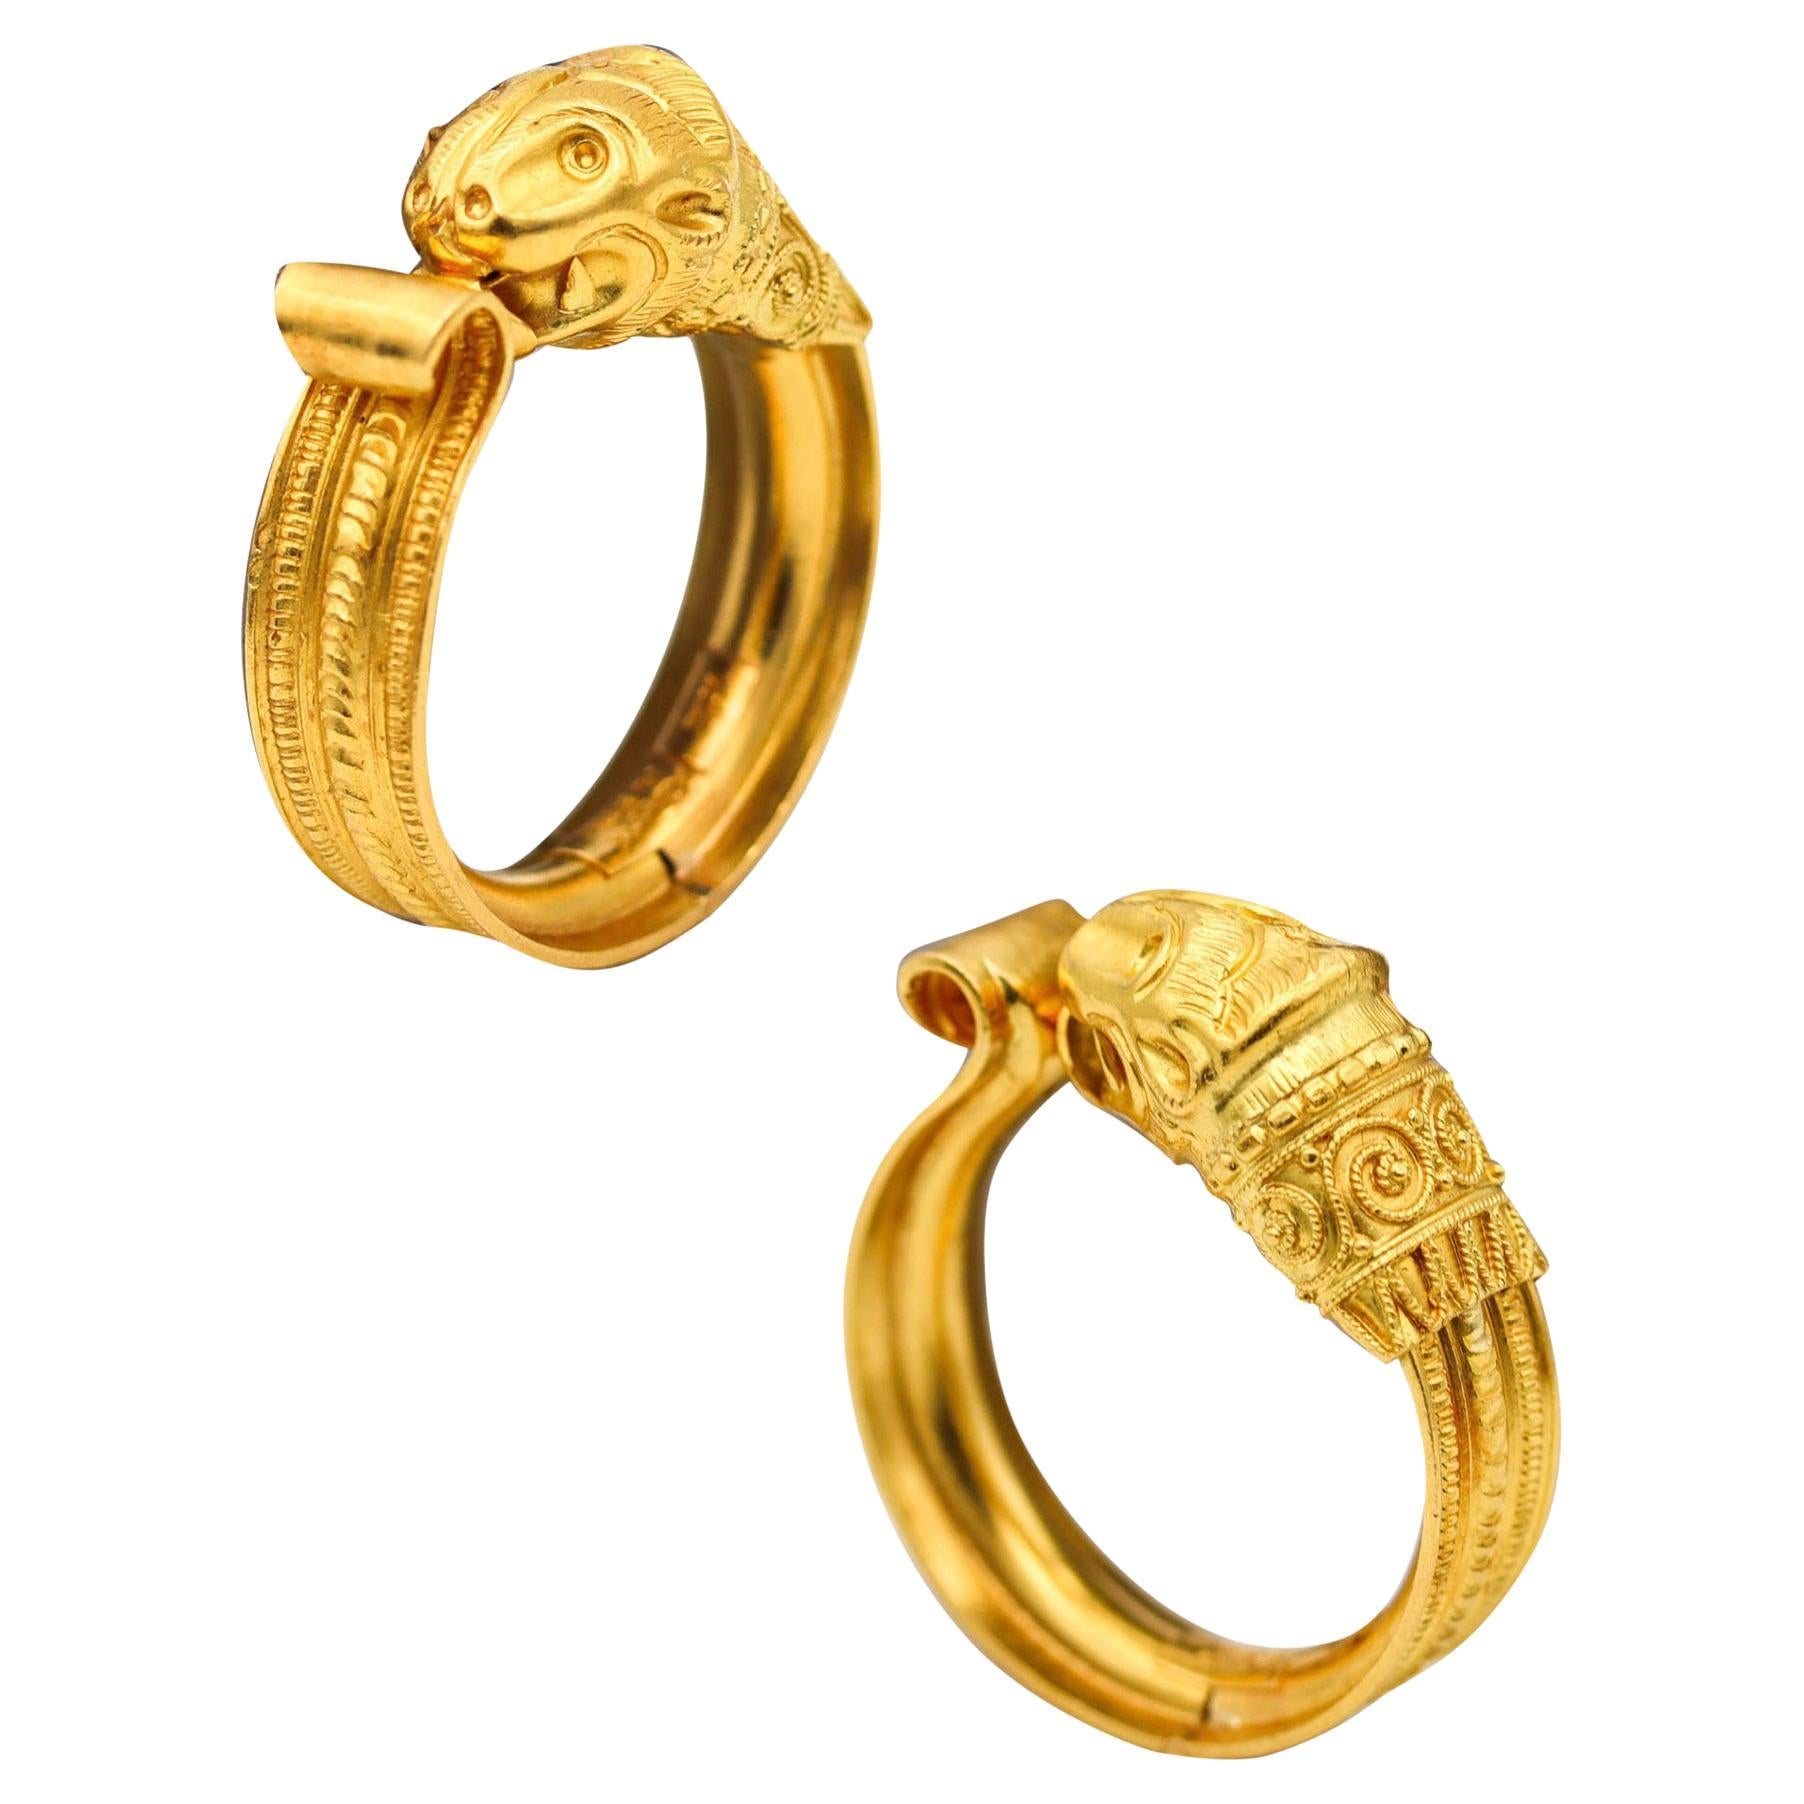 Lalaounis 1970 Paris Hellenistic Hoops Earrings In Solid 18Kt Yellow Gold